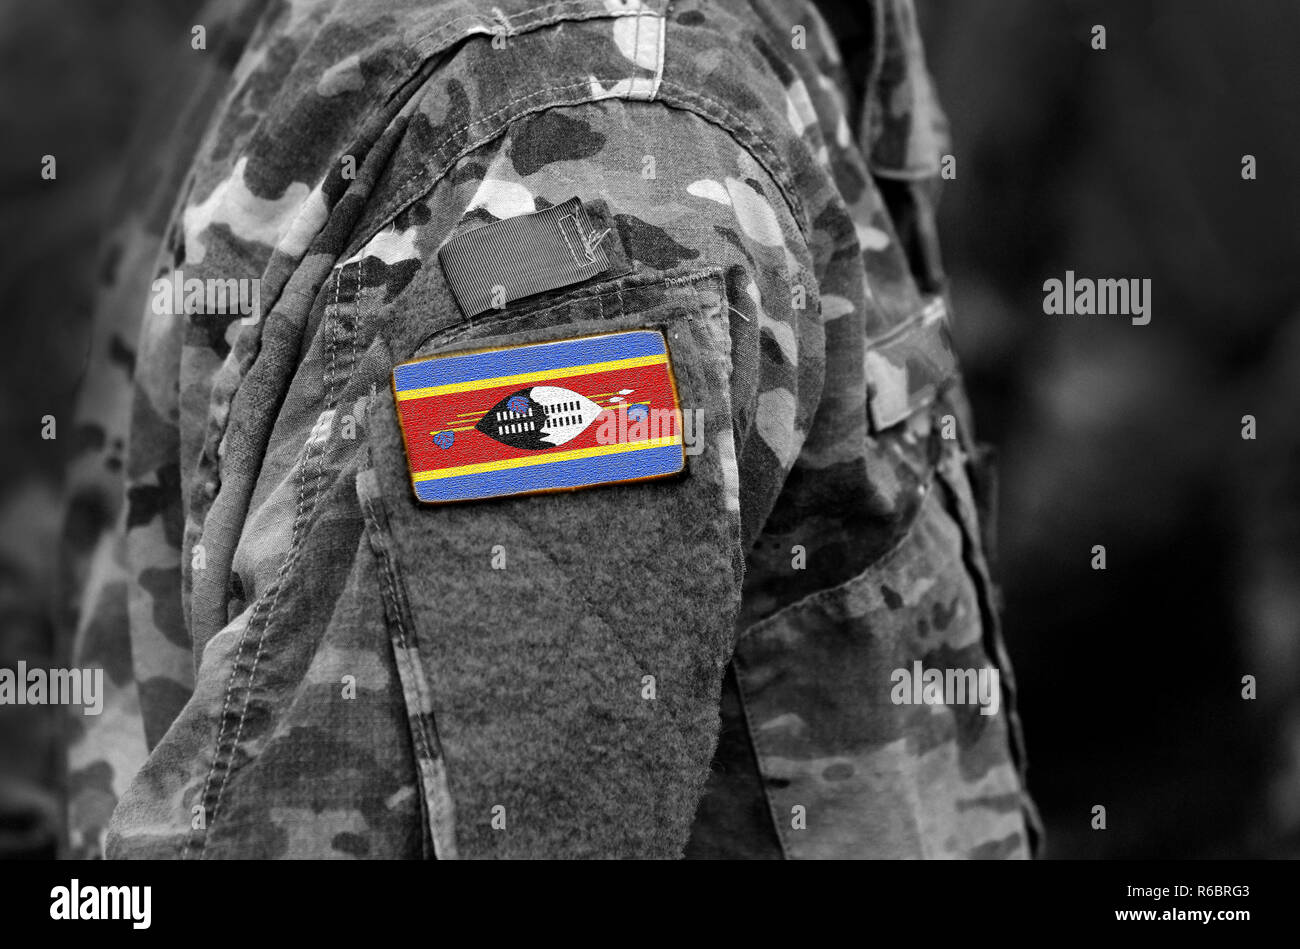 Eswatini, also known as Swaziland flag on soldiers arm. Kingdom of Eswatini flag on military uniform. Army, troops, military, Africa (collage). Stock Photo